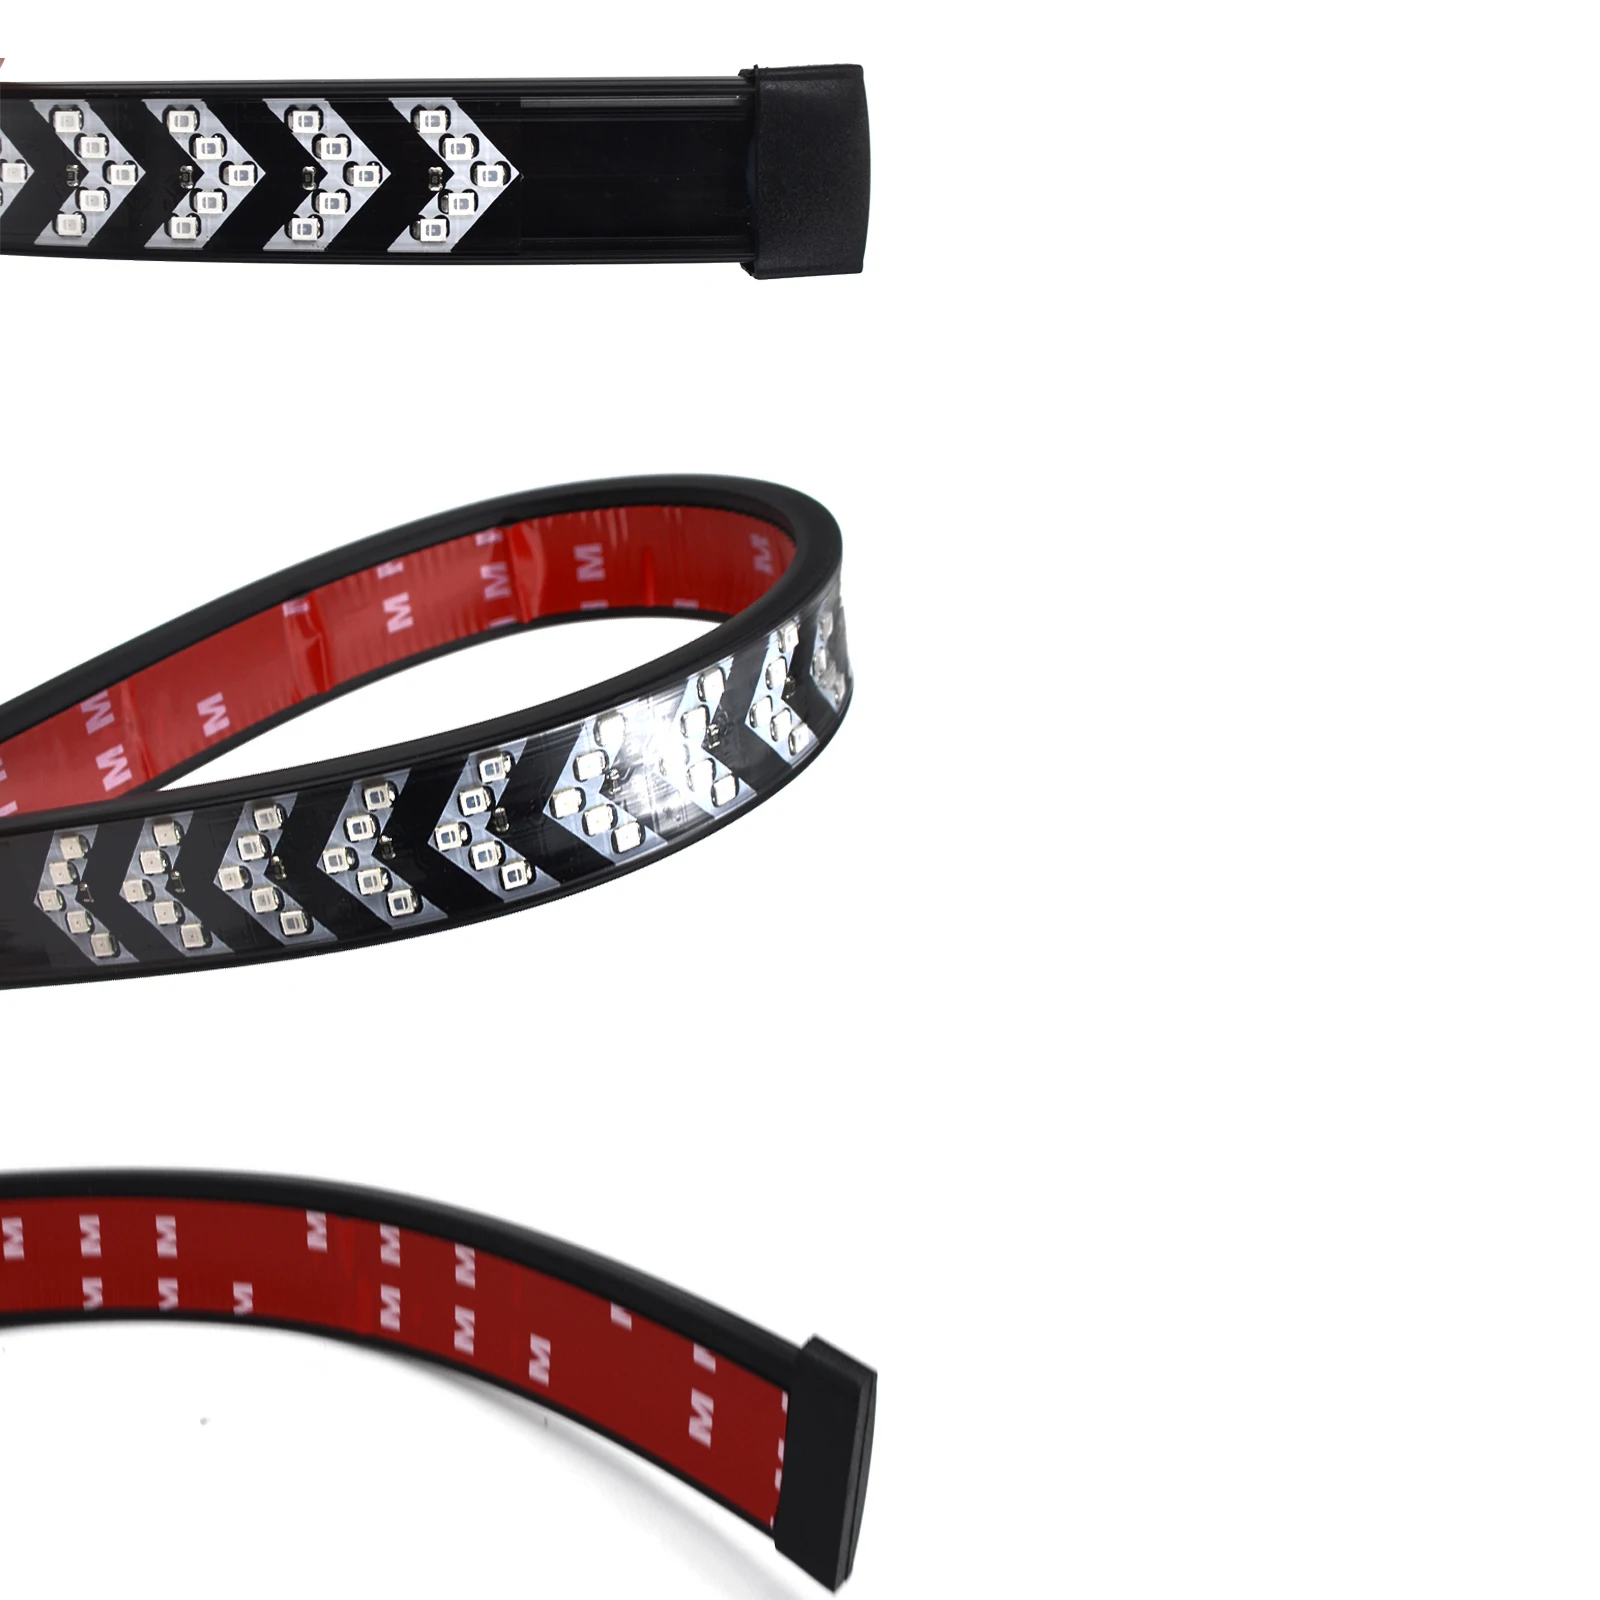 49 Inches Led Tailgate Light Bar 360 Red and 108 White LED Scanning tailgate light Strip Running Turn Signal Brake Reverse Tail